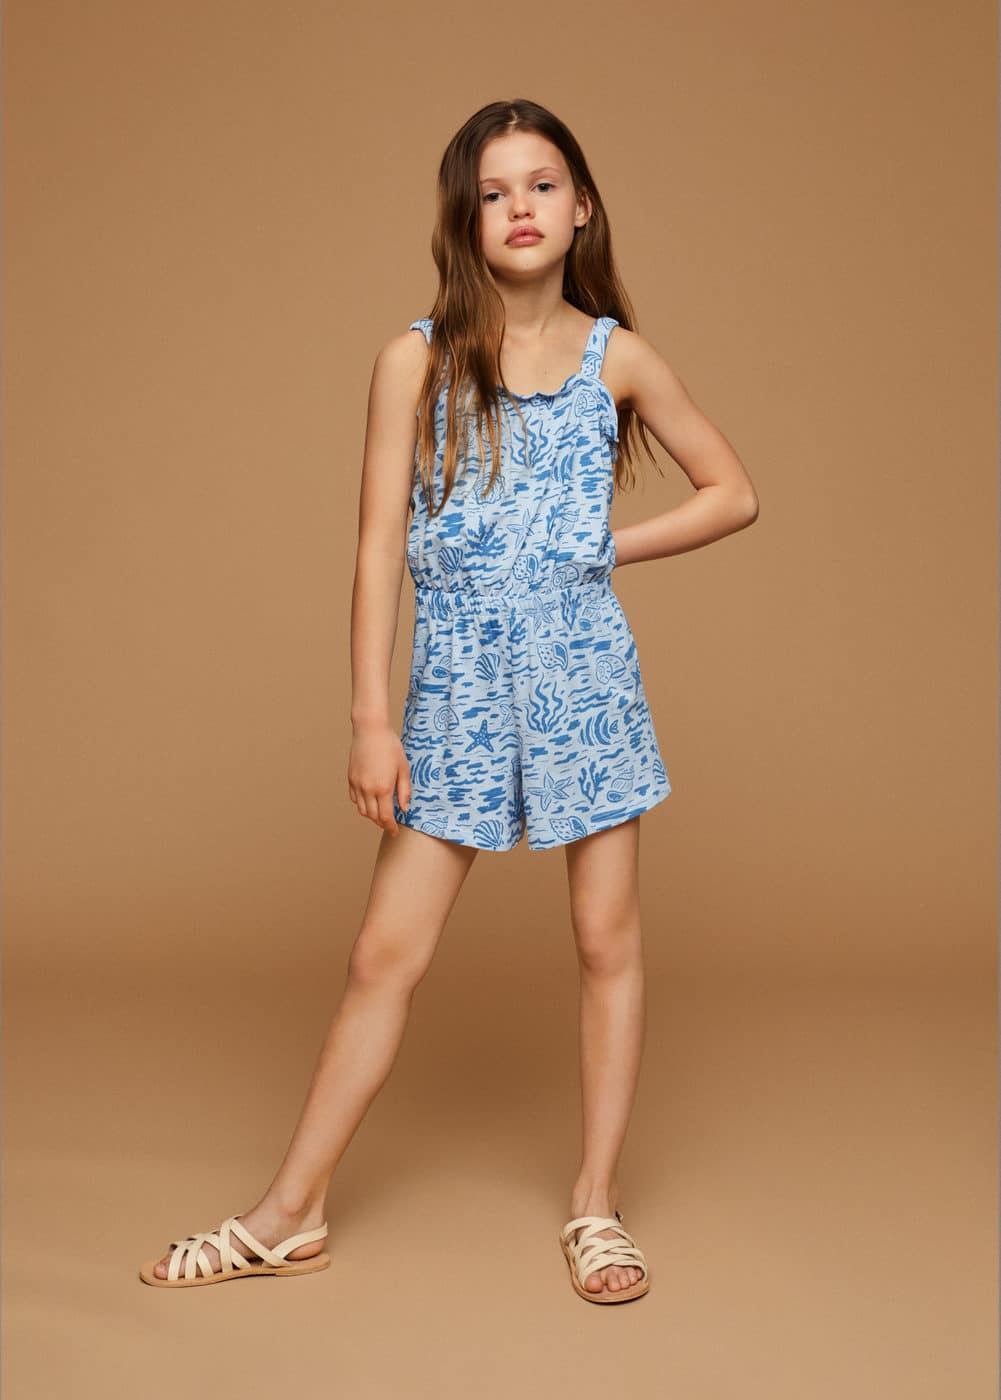 Girls's Fashion Outlet | Mango Outlet USA 童装额外8折 CODE EXTRA20